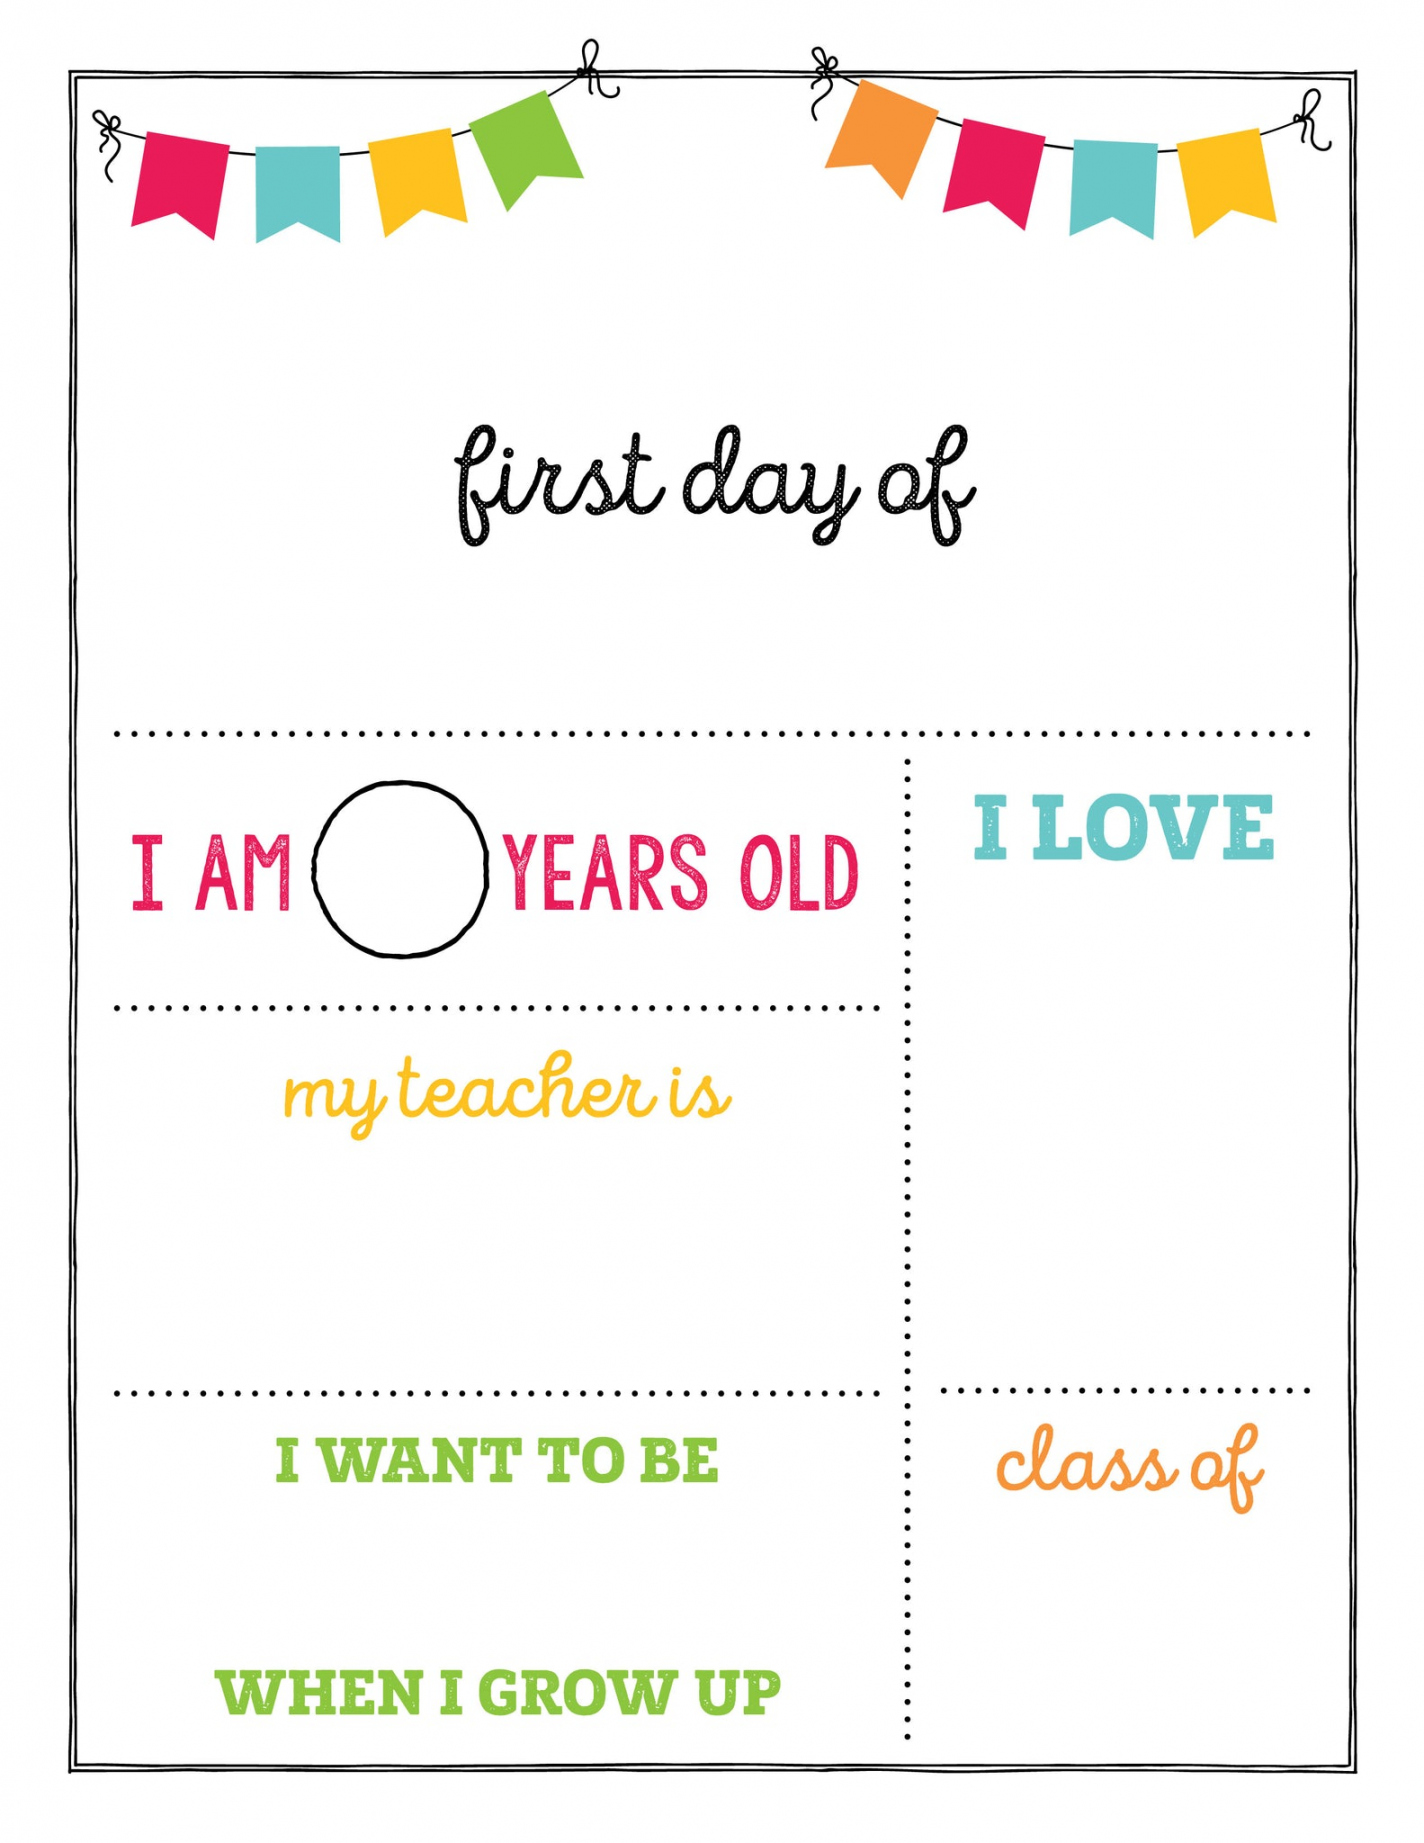 Free First Day of School Printables - Printable - First Day of School Printable – Party Hop Shop